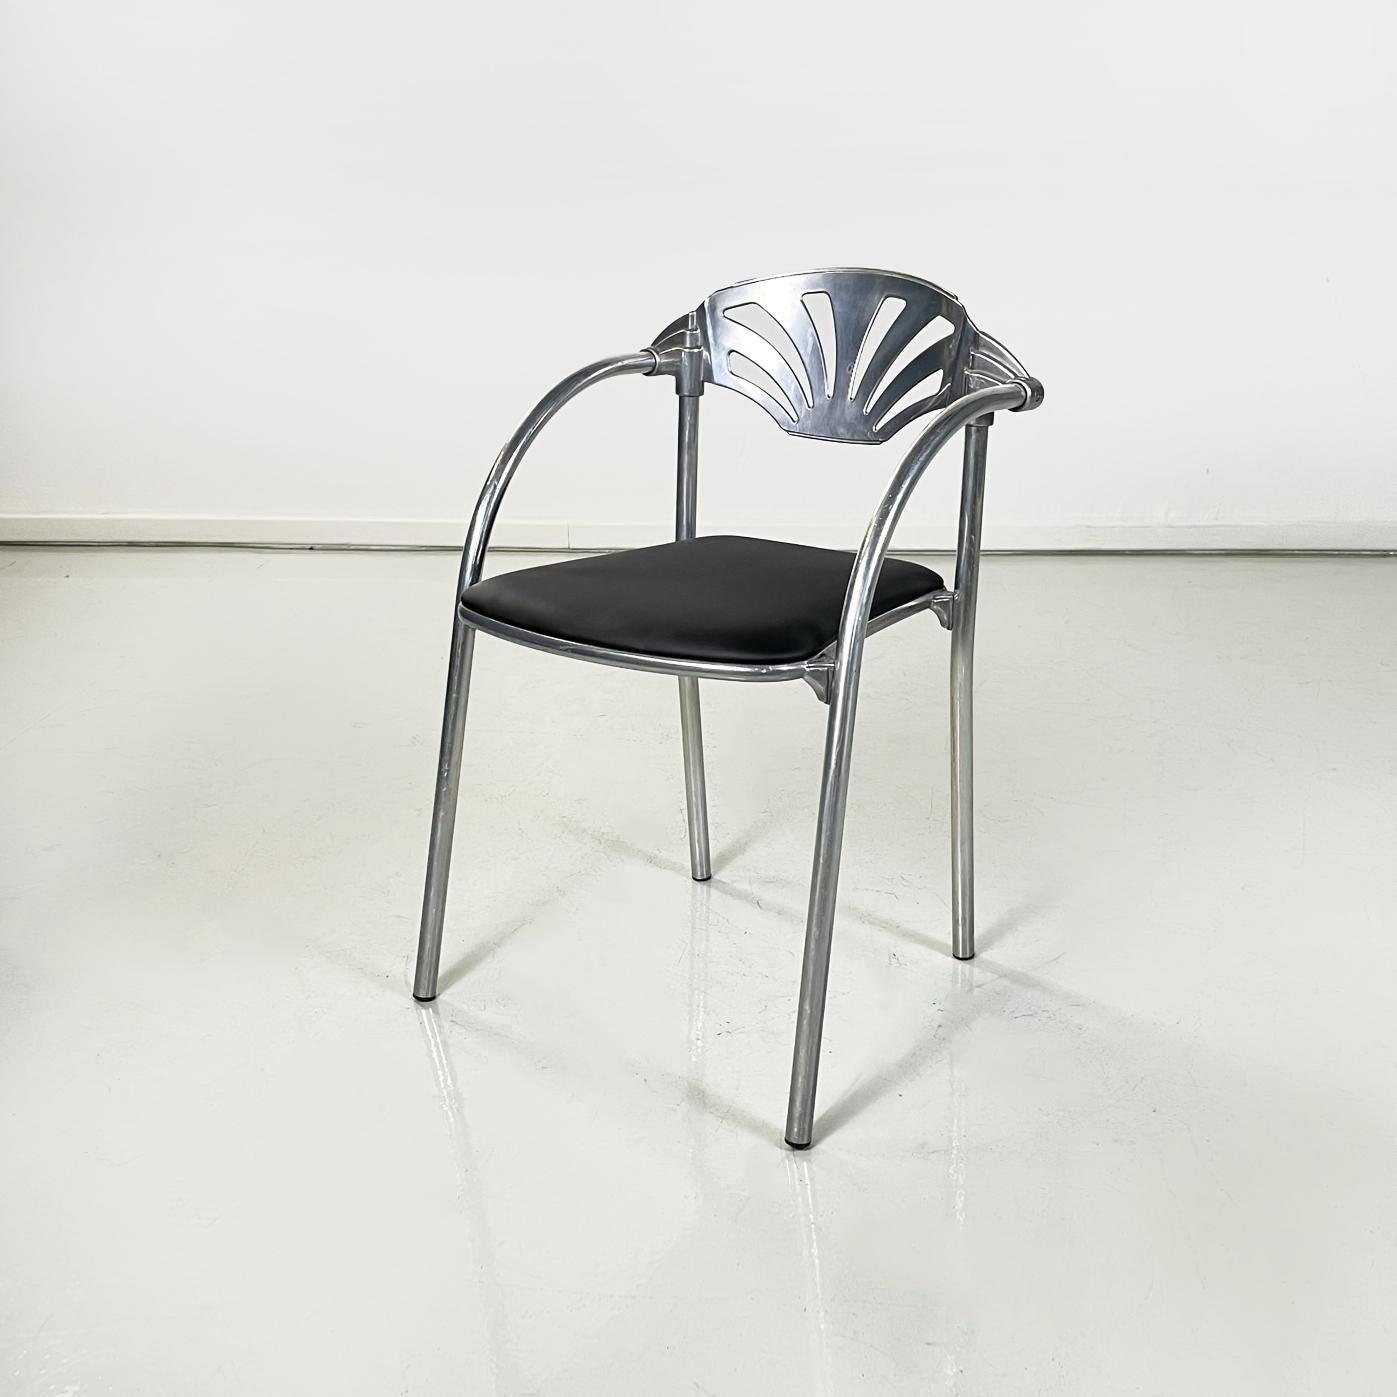 Italian modern black sky Chairs Alisea by Lisa Bross for Studio Simonetti, 1980s
Fantastic set of 4 chairs mod. Alisea with padded seat, covered in black sky. The rounded and curved backrest is in aluminum. The structure of the armrests and legs is